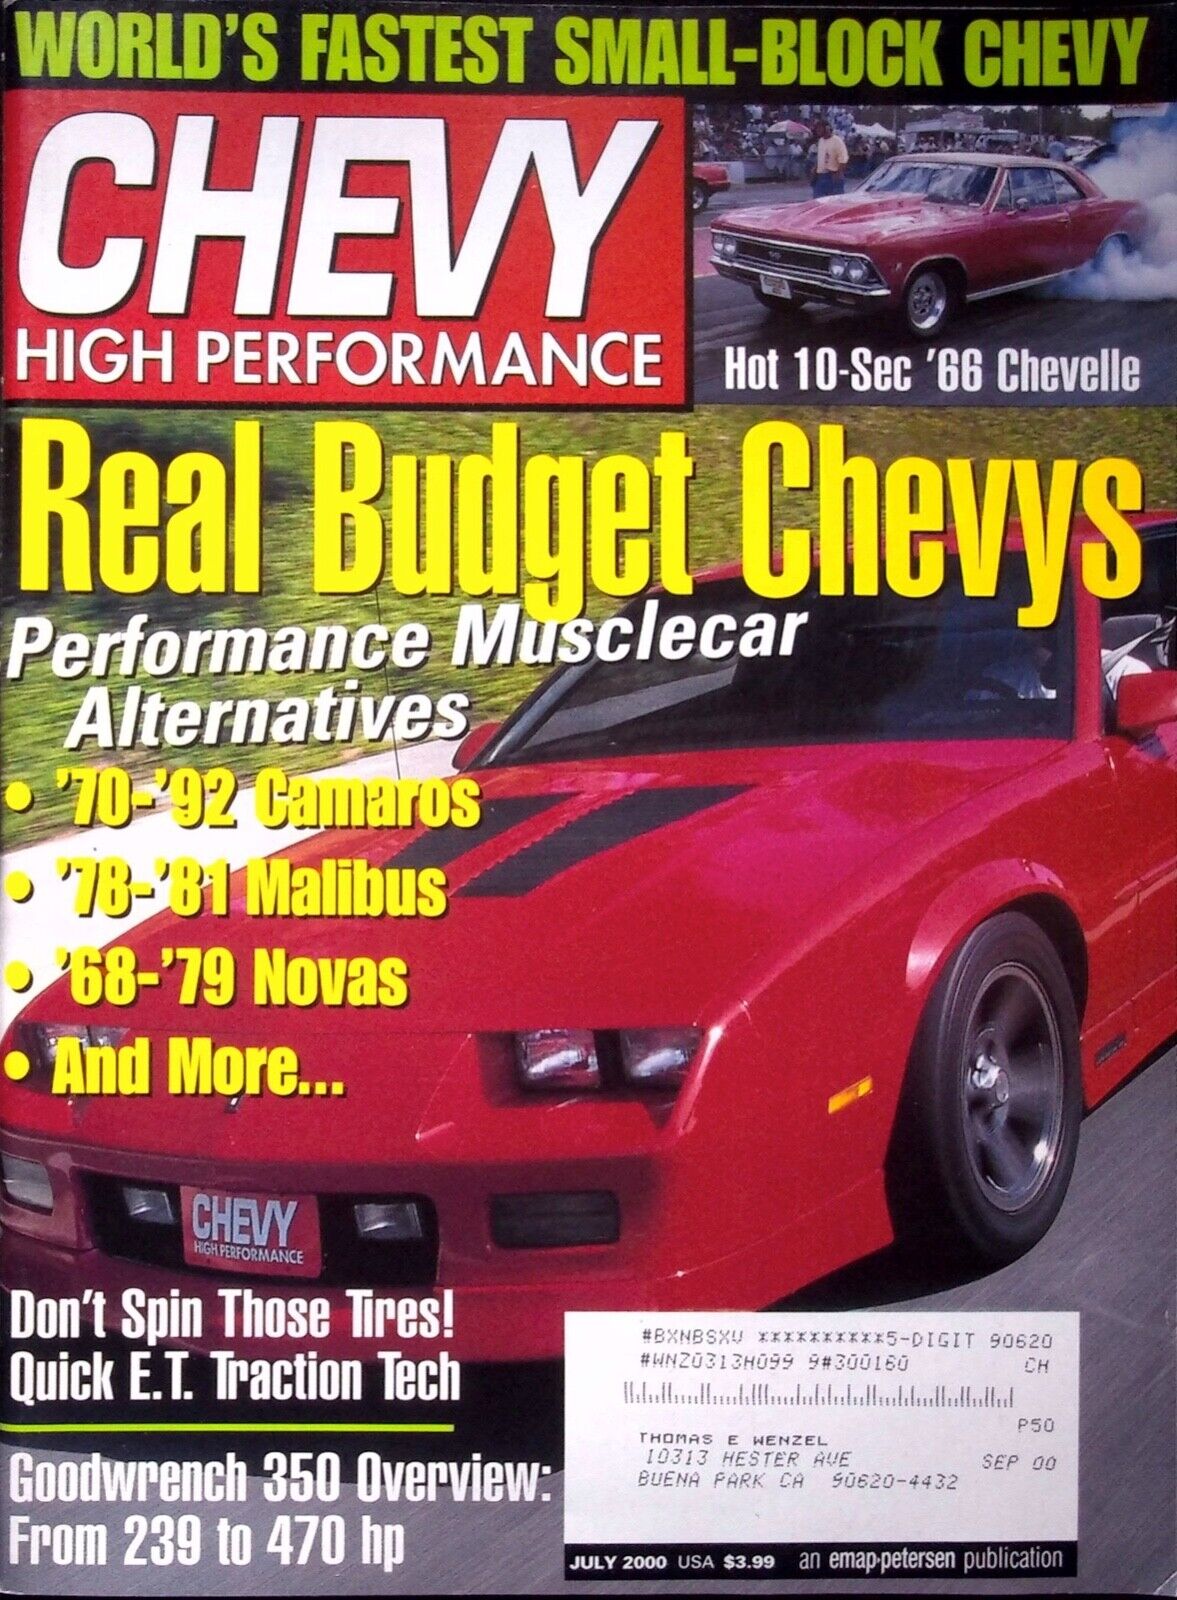 REAL BUDGET CHEVYS - CHEVY HIGH PERFORMANCE MAGAZINE, JULY 2000